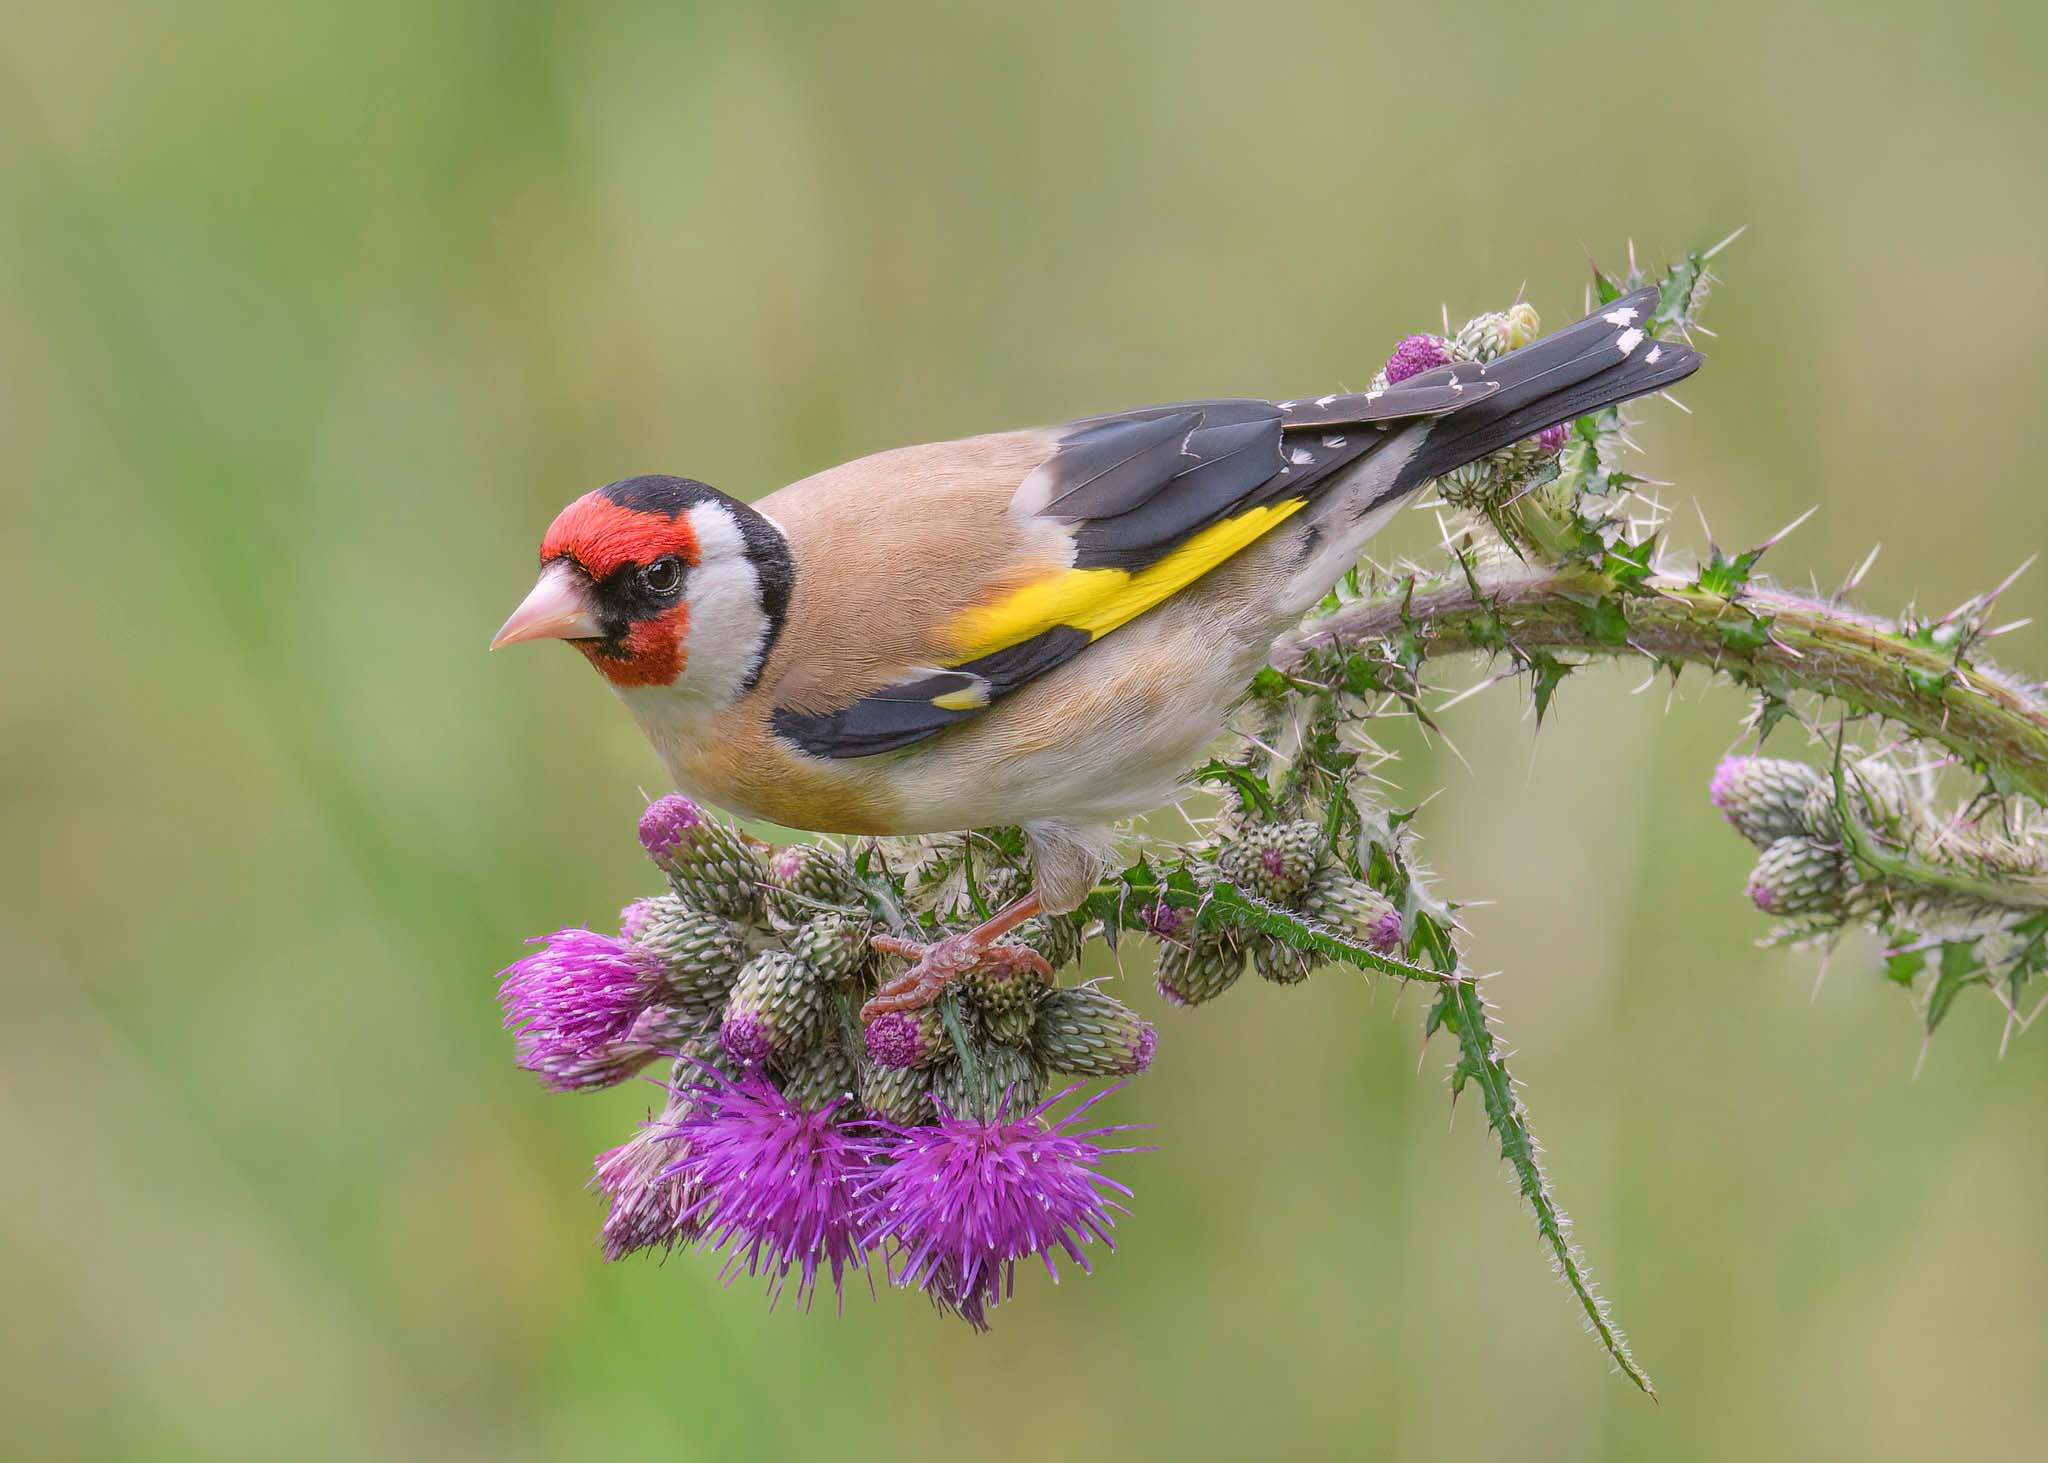 A colourful bird perched on a thistle branch